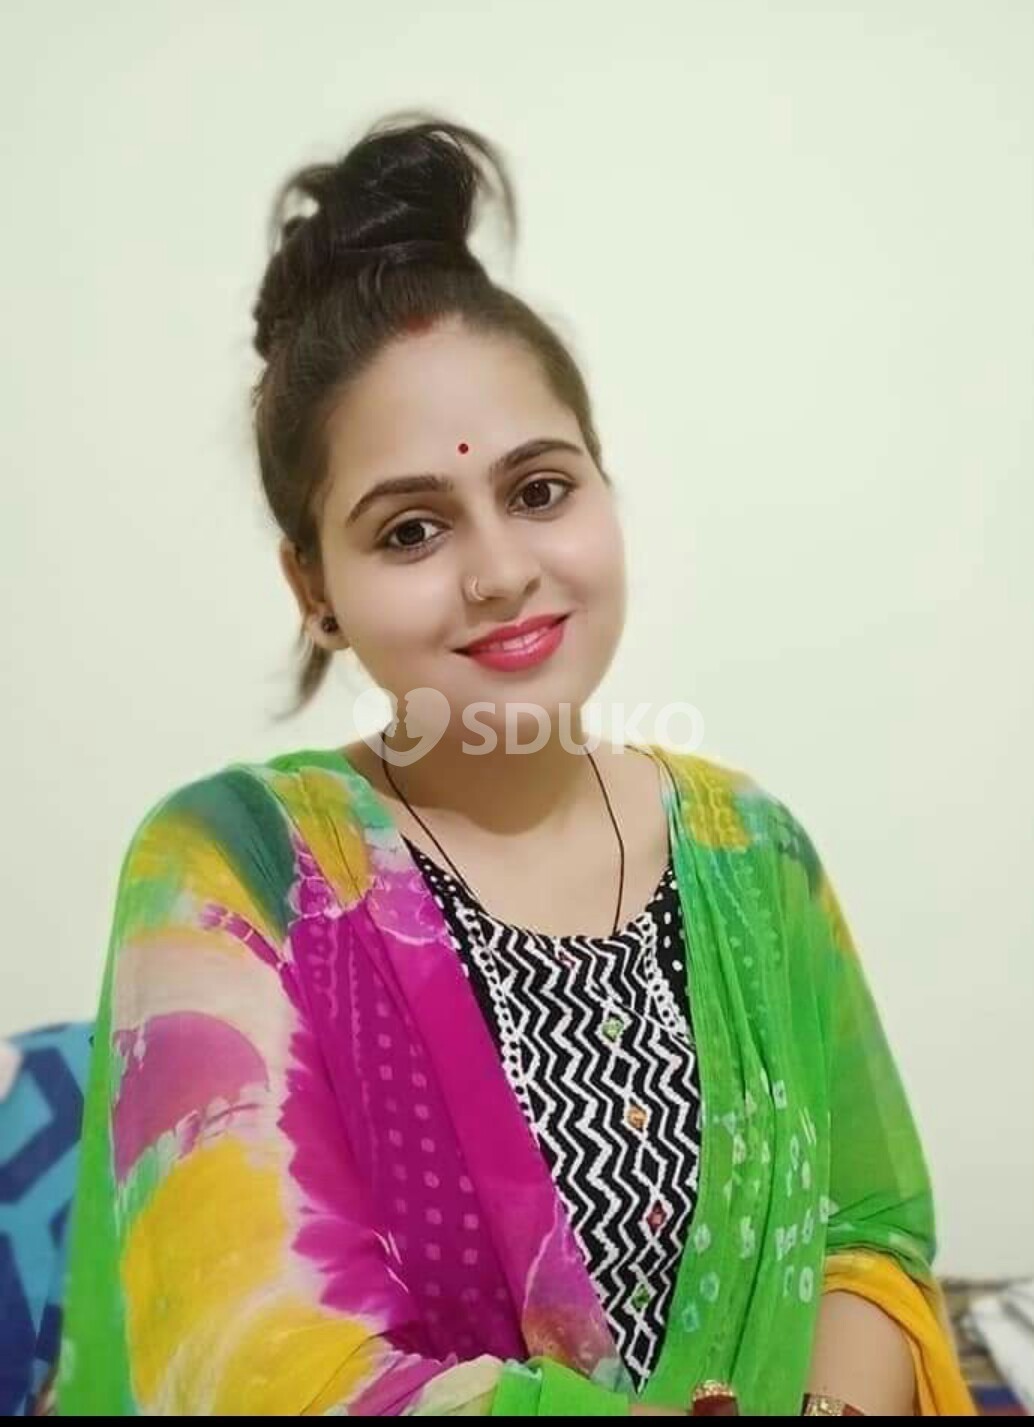 Hello Guys I am Mohini Pune low cost unlimited hard sex call girl service